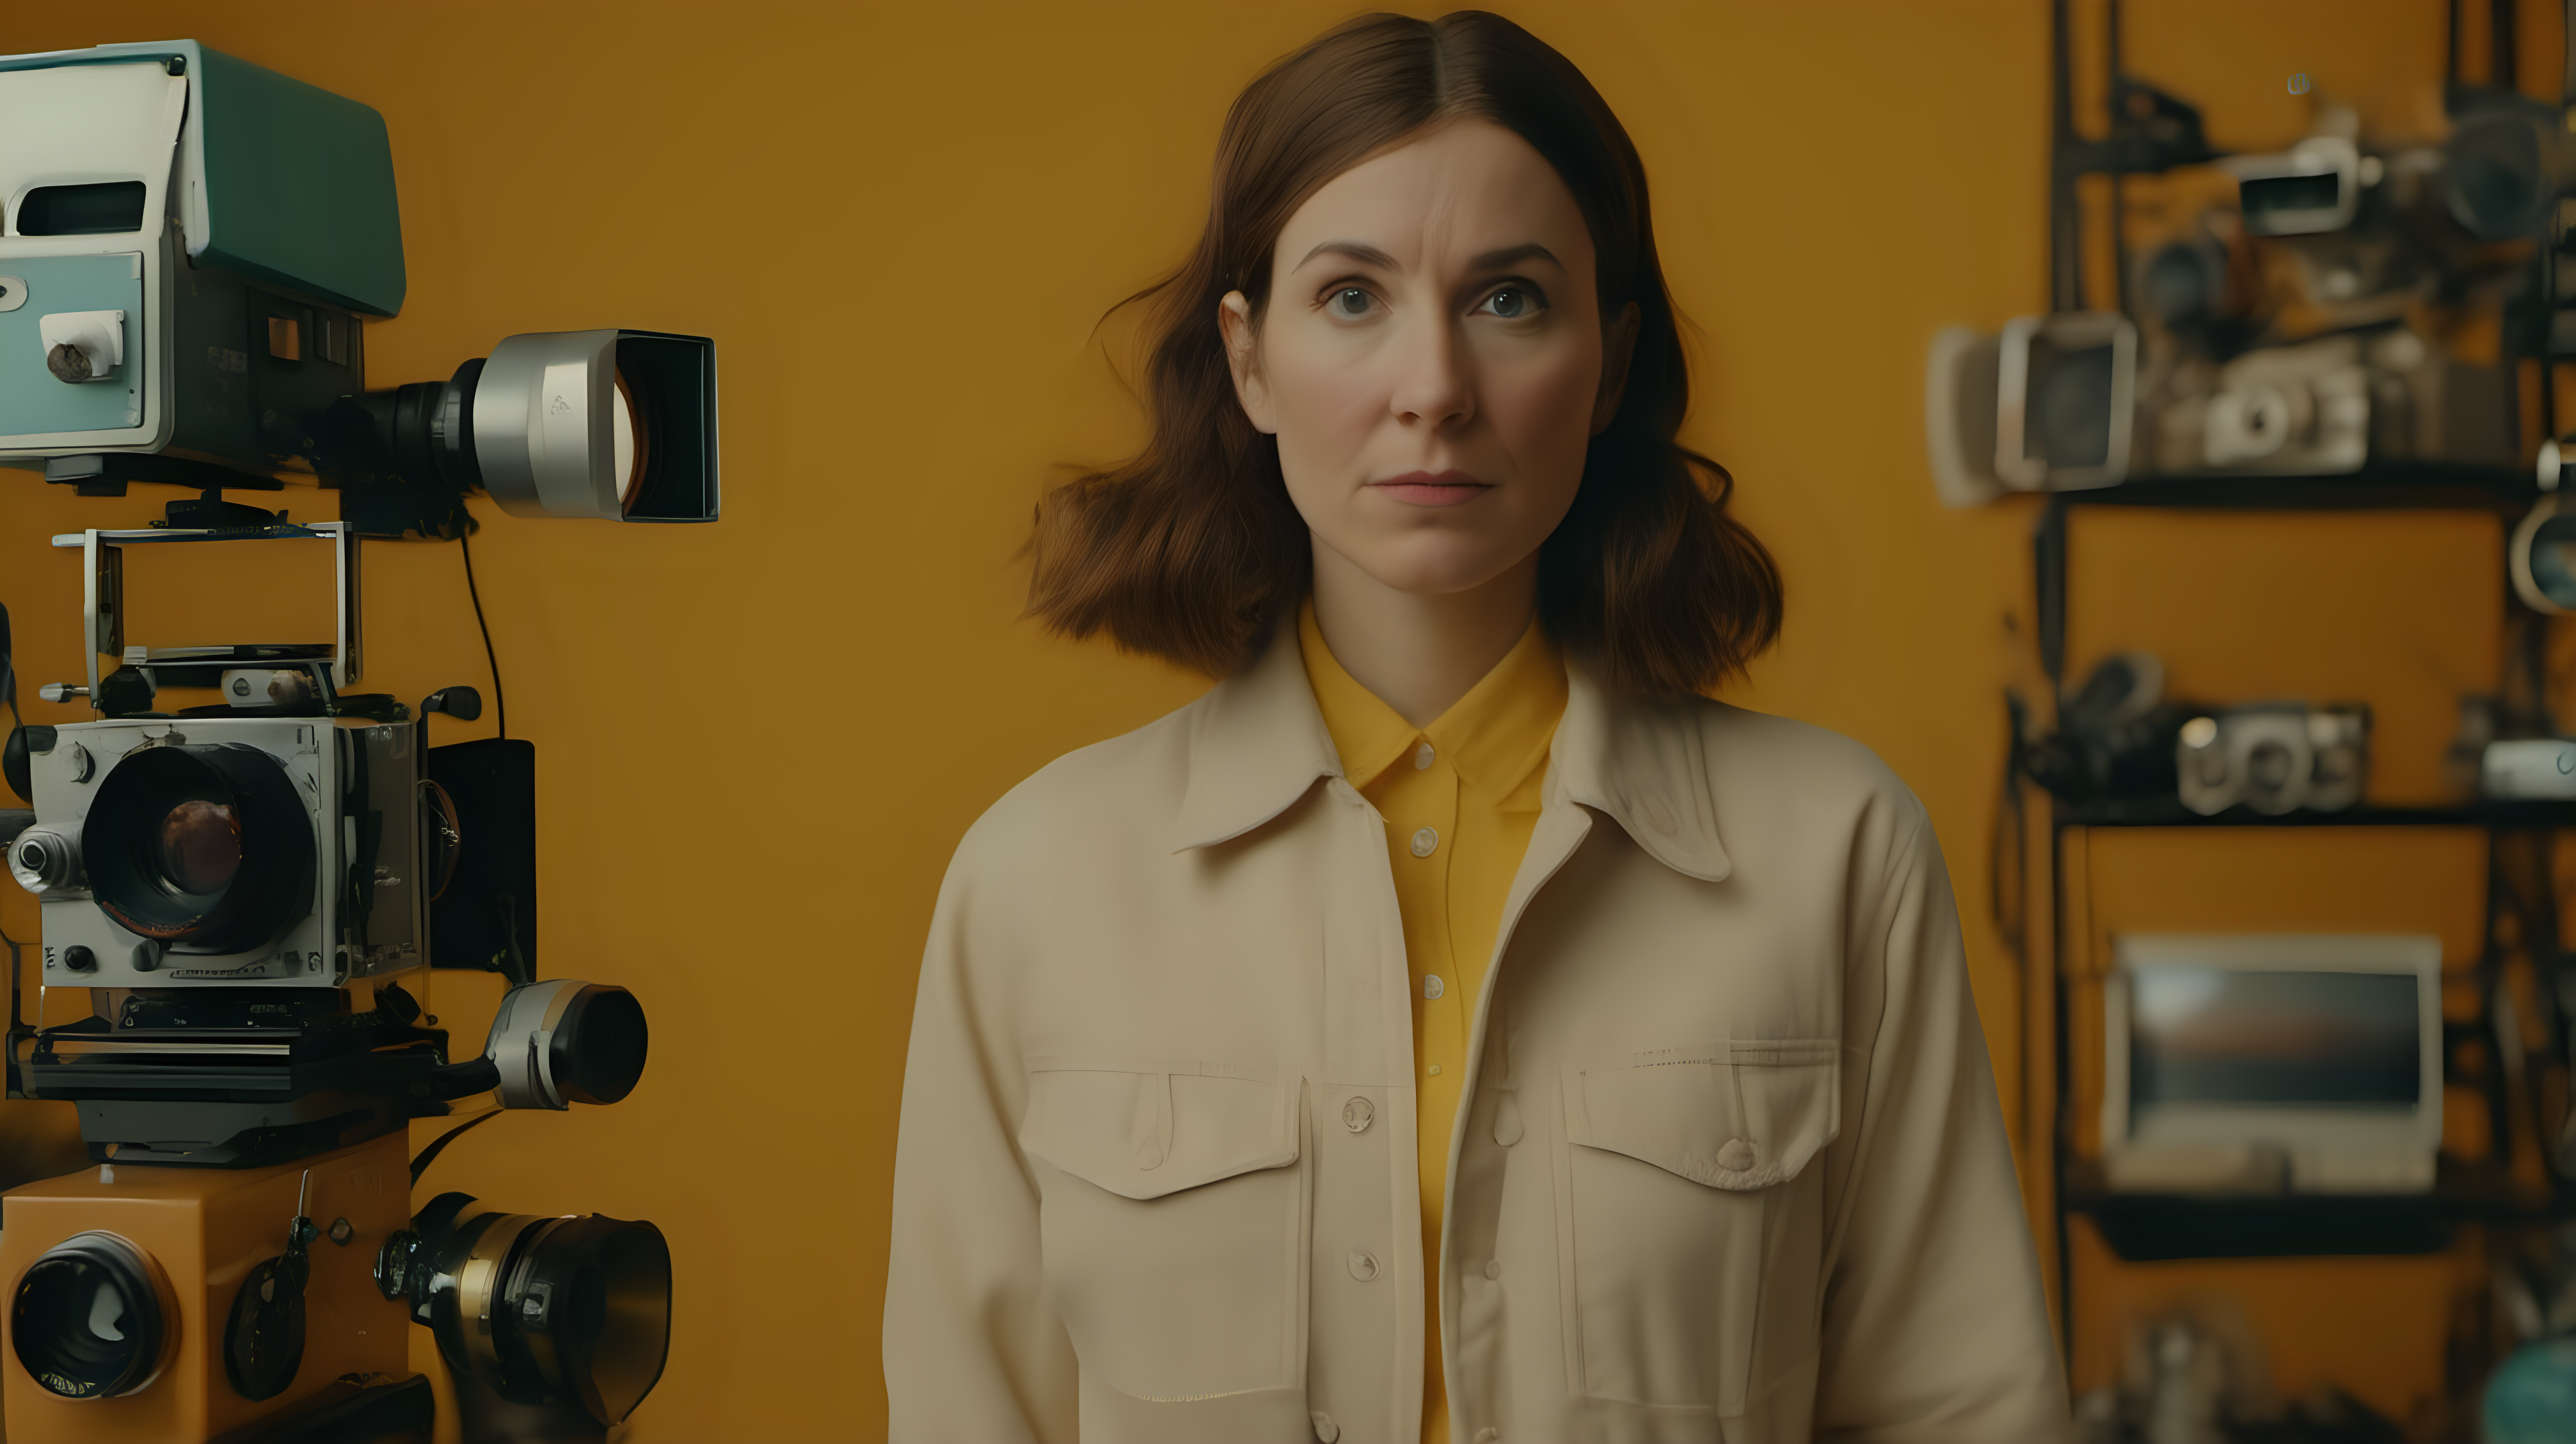 cinematic medium-wide-shot image using a 50mm lens of a female film producer staring at camera in the style of a wes anderson film